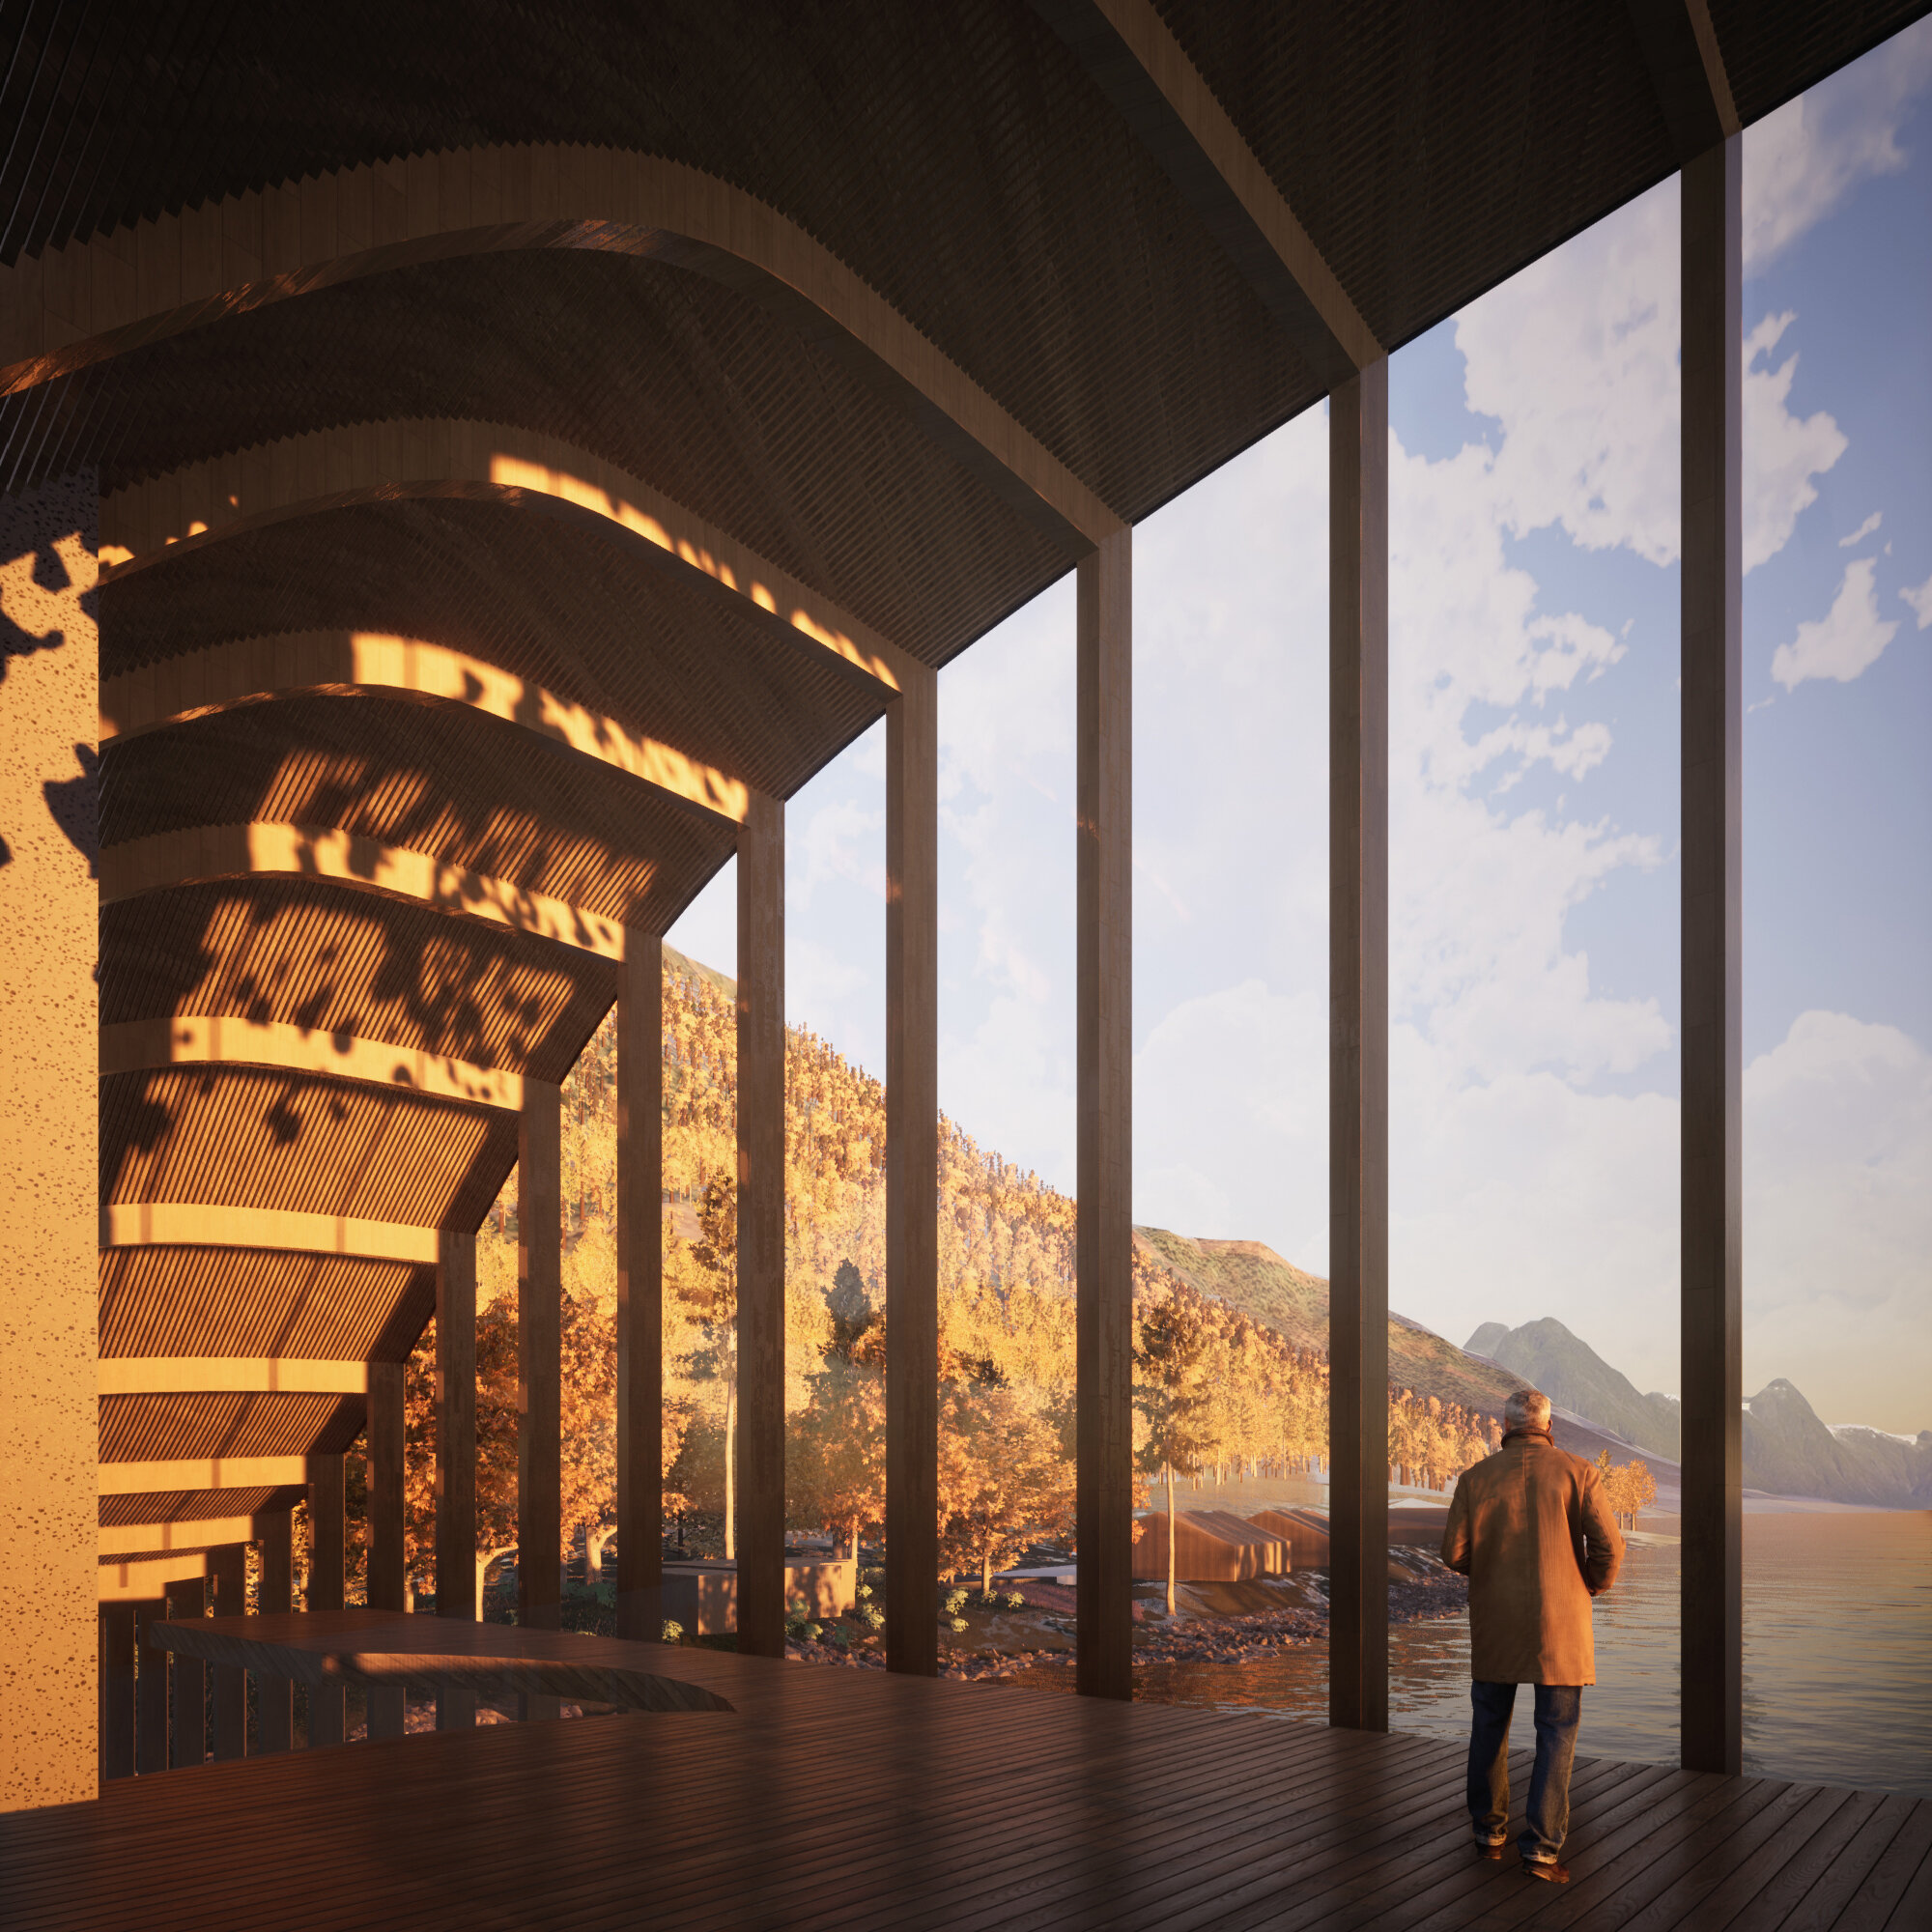  The new dissemination center in Fjærland will offer visitors, locals and employees an innovative facility and a unique experience. 